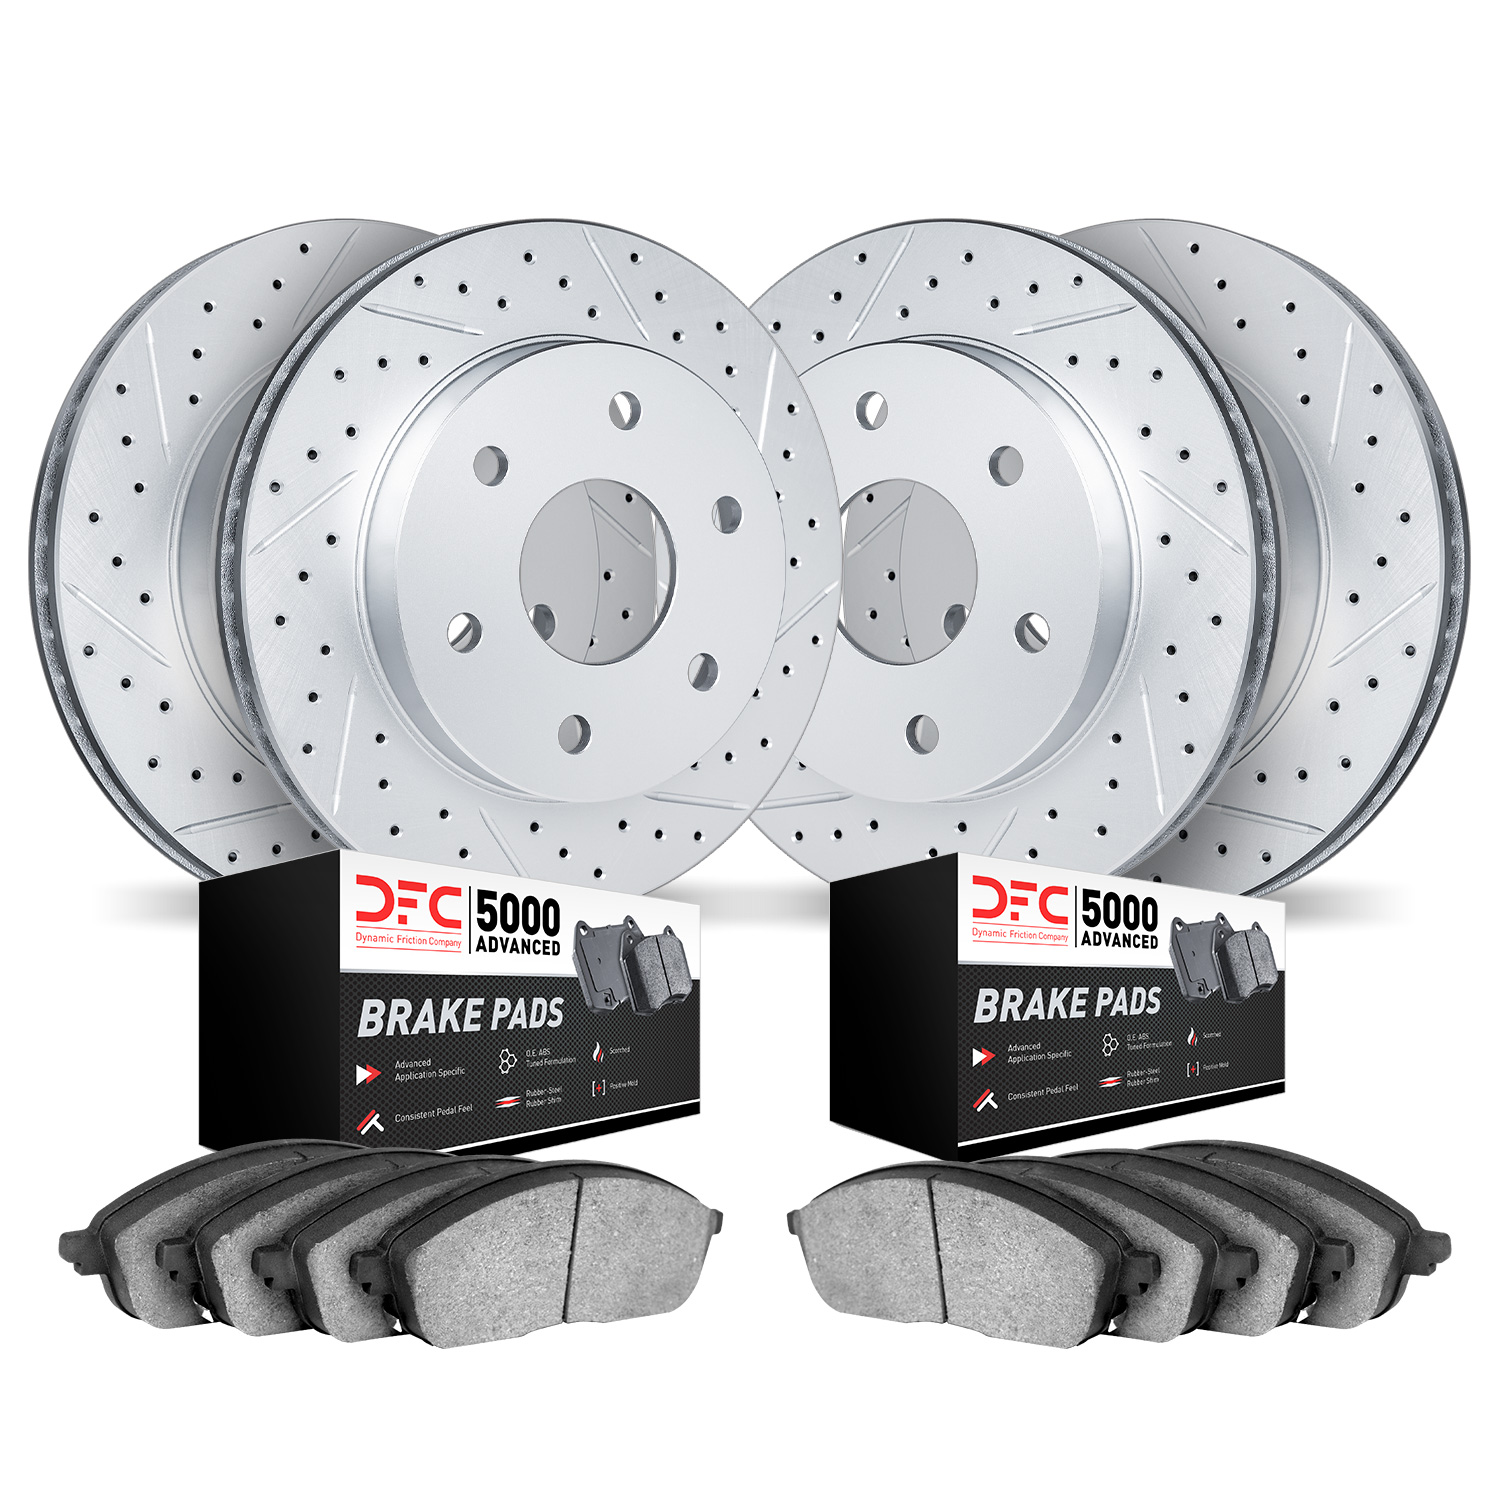 2504-67072 Geoperformance Drilled/Slotted Rotors w/5000 Advanced Brake Pads Kit, 2005-2012 Infiniti/Nissan, Position: Front and